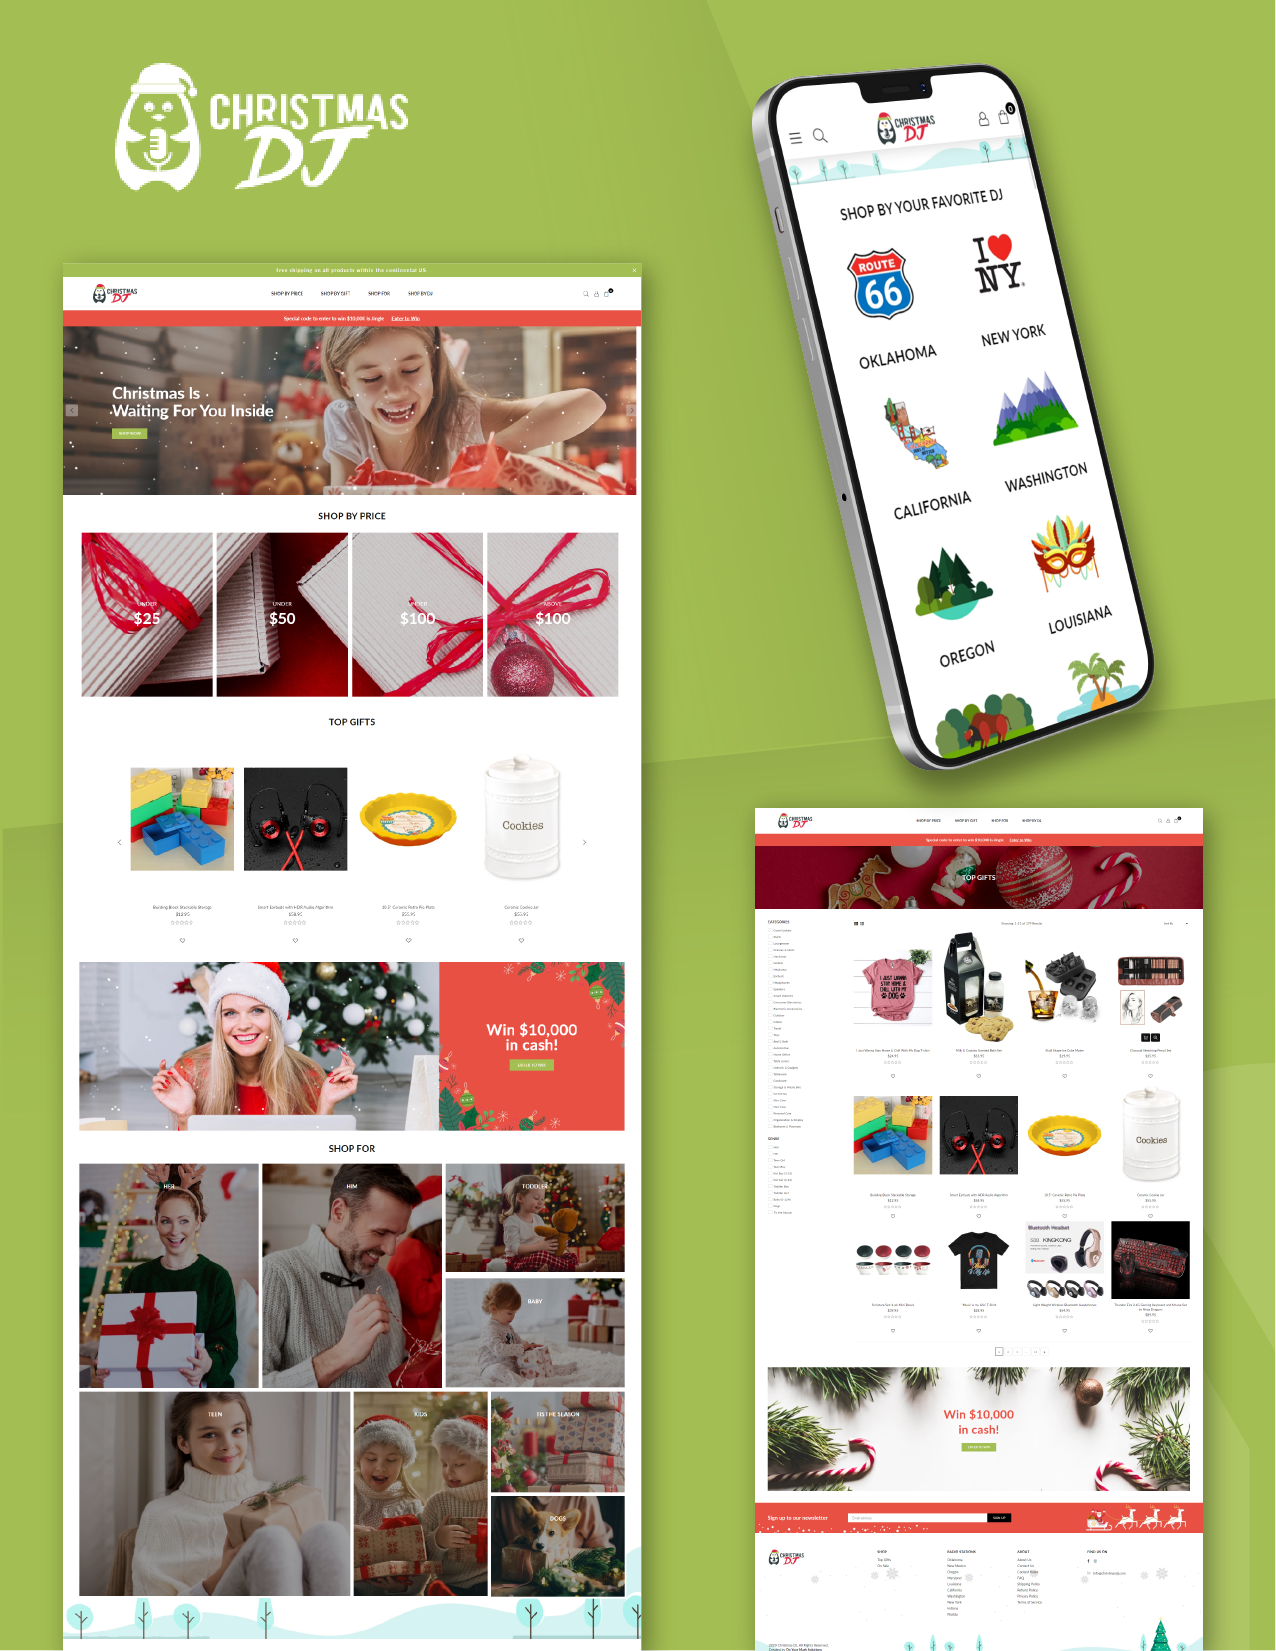 Christmas DJ Website overview and ecommerce website showcase